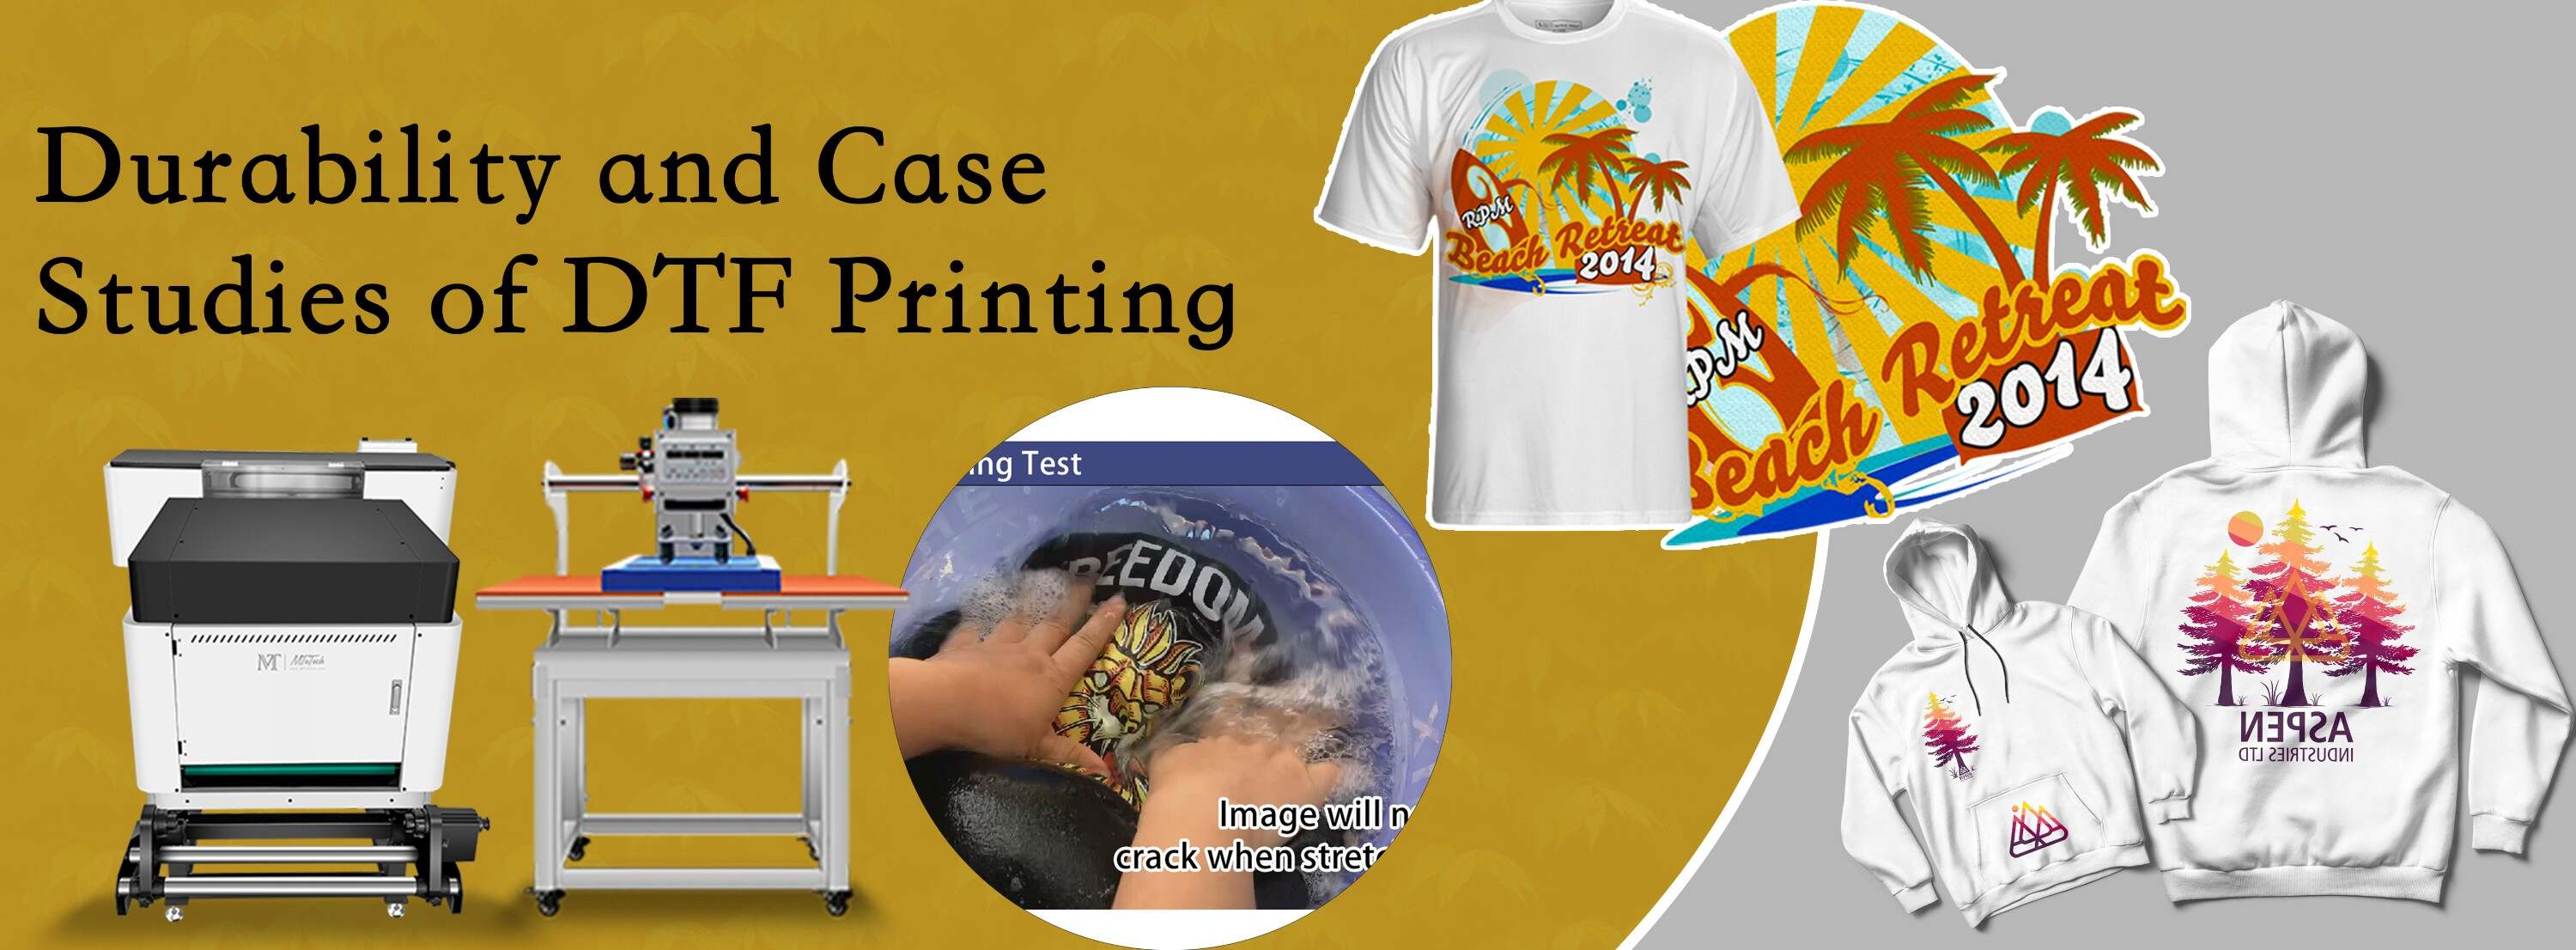 Durability and Case Studies of DTF Printing